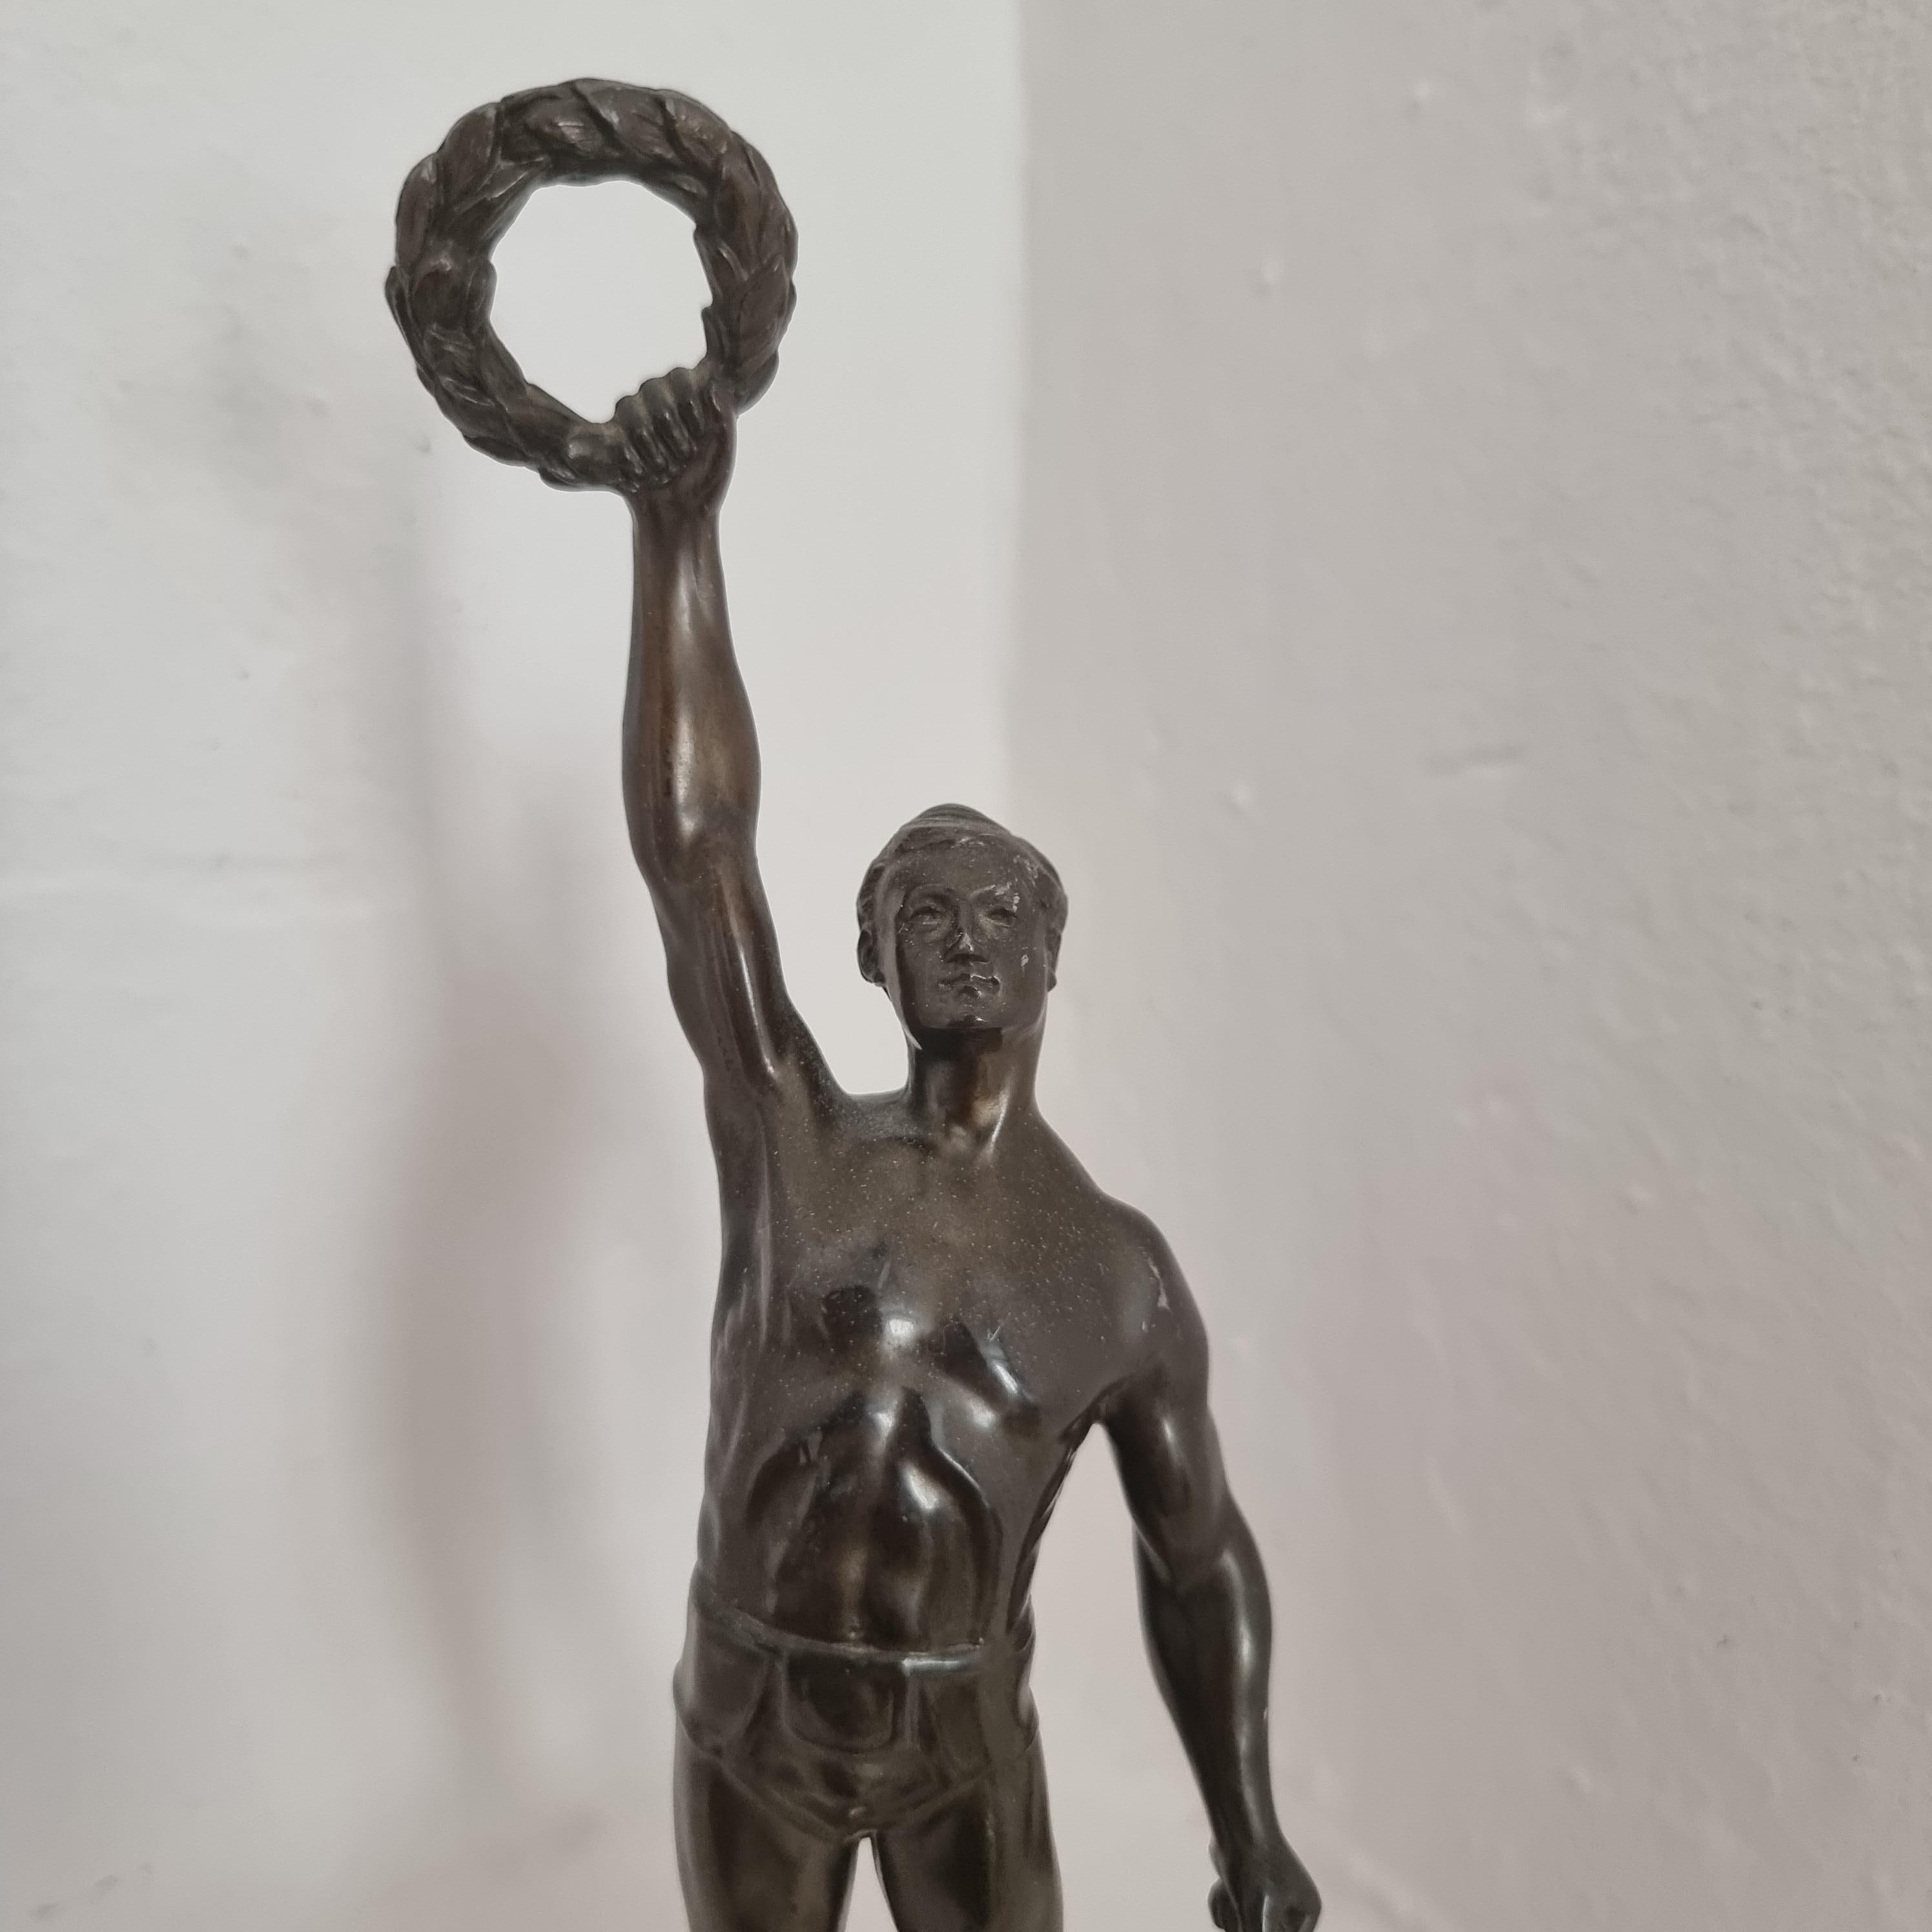 Swedish Sculpture / Prize, Athlete with Laurel-Crown, Bronze patinated zinc and marble